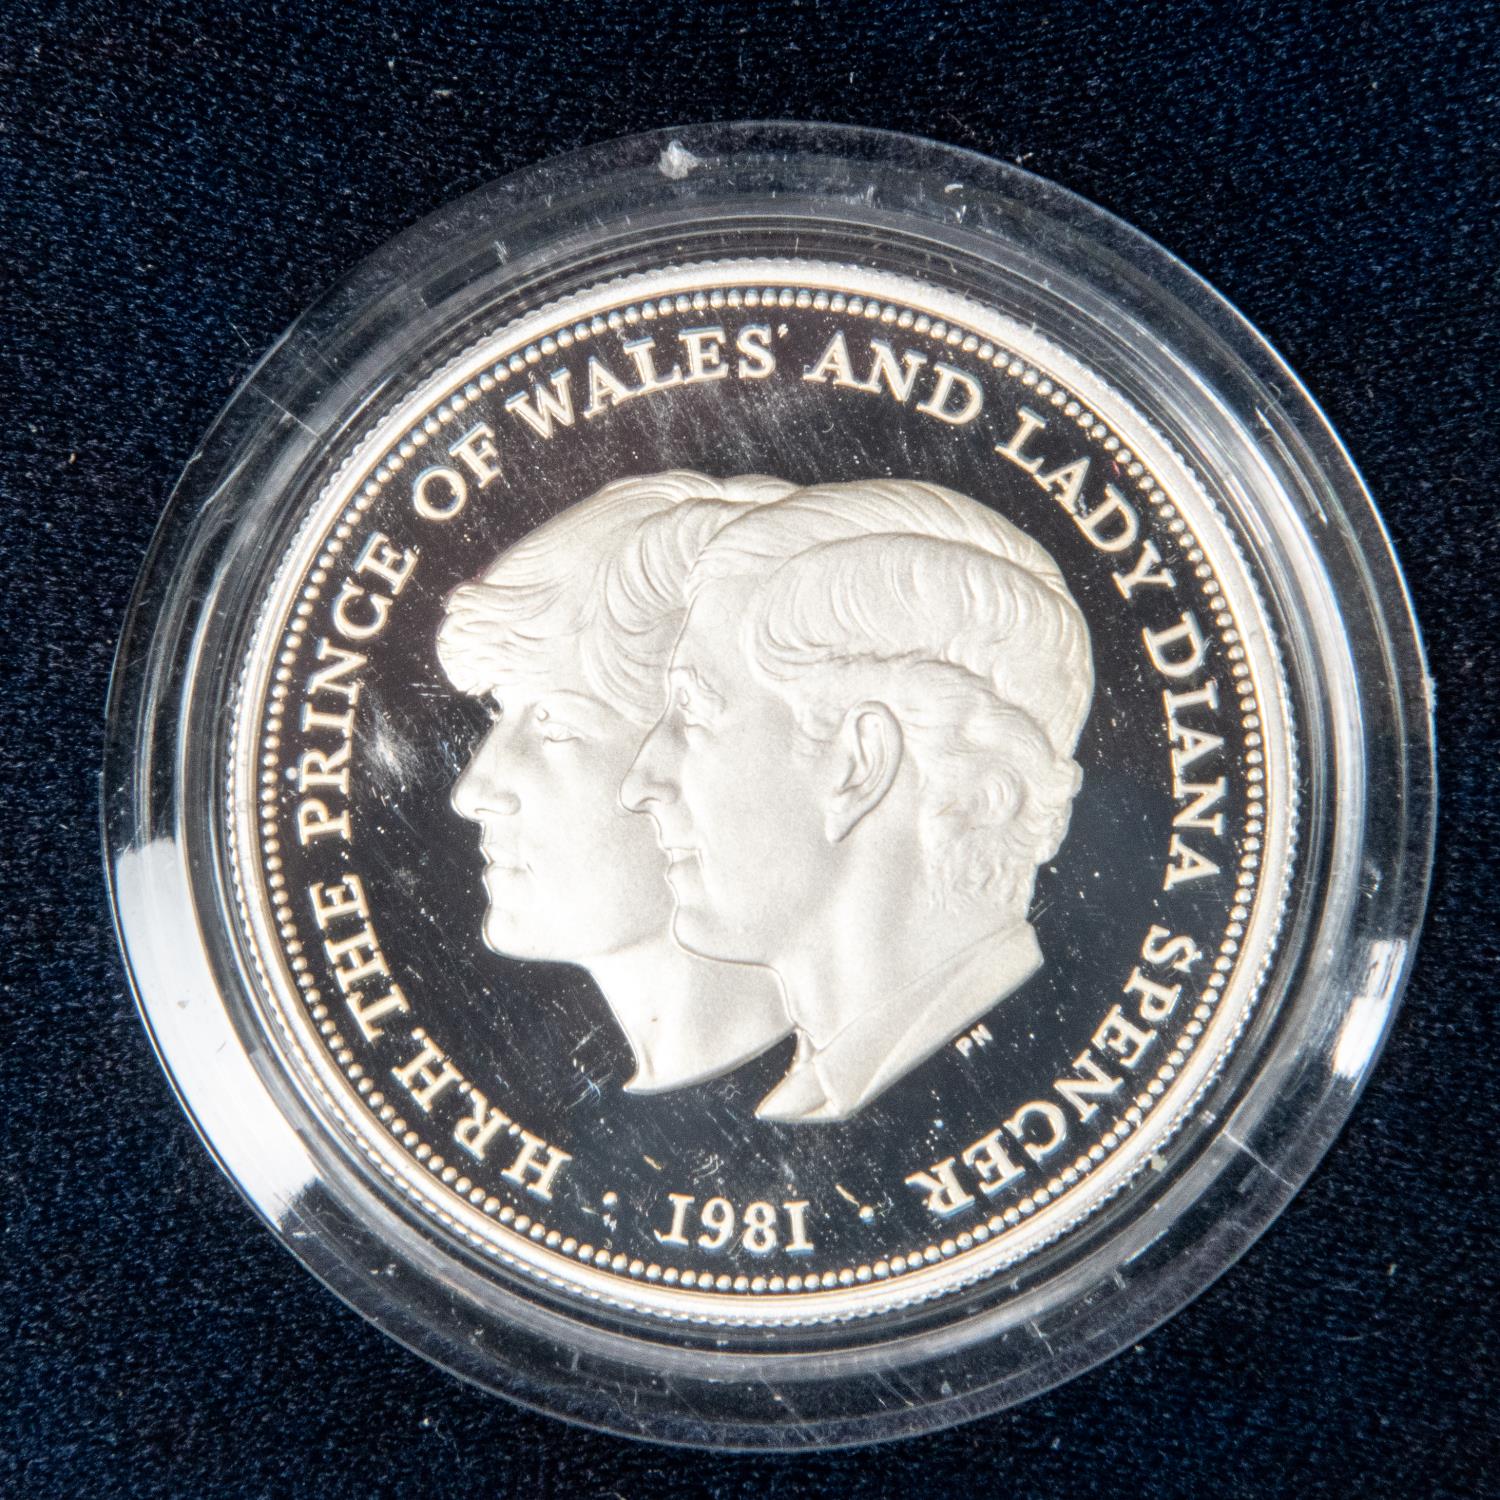 Elizabeth II silver proof issue £1 1988; Silver proof crown, 1981 commemorating the wedding of the - Image 10 of 11